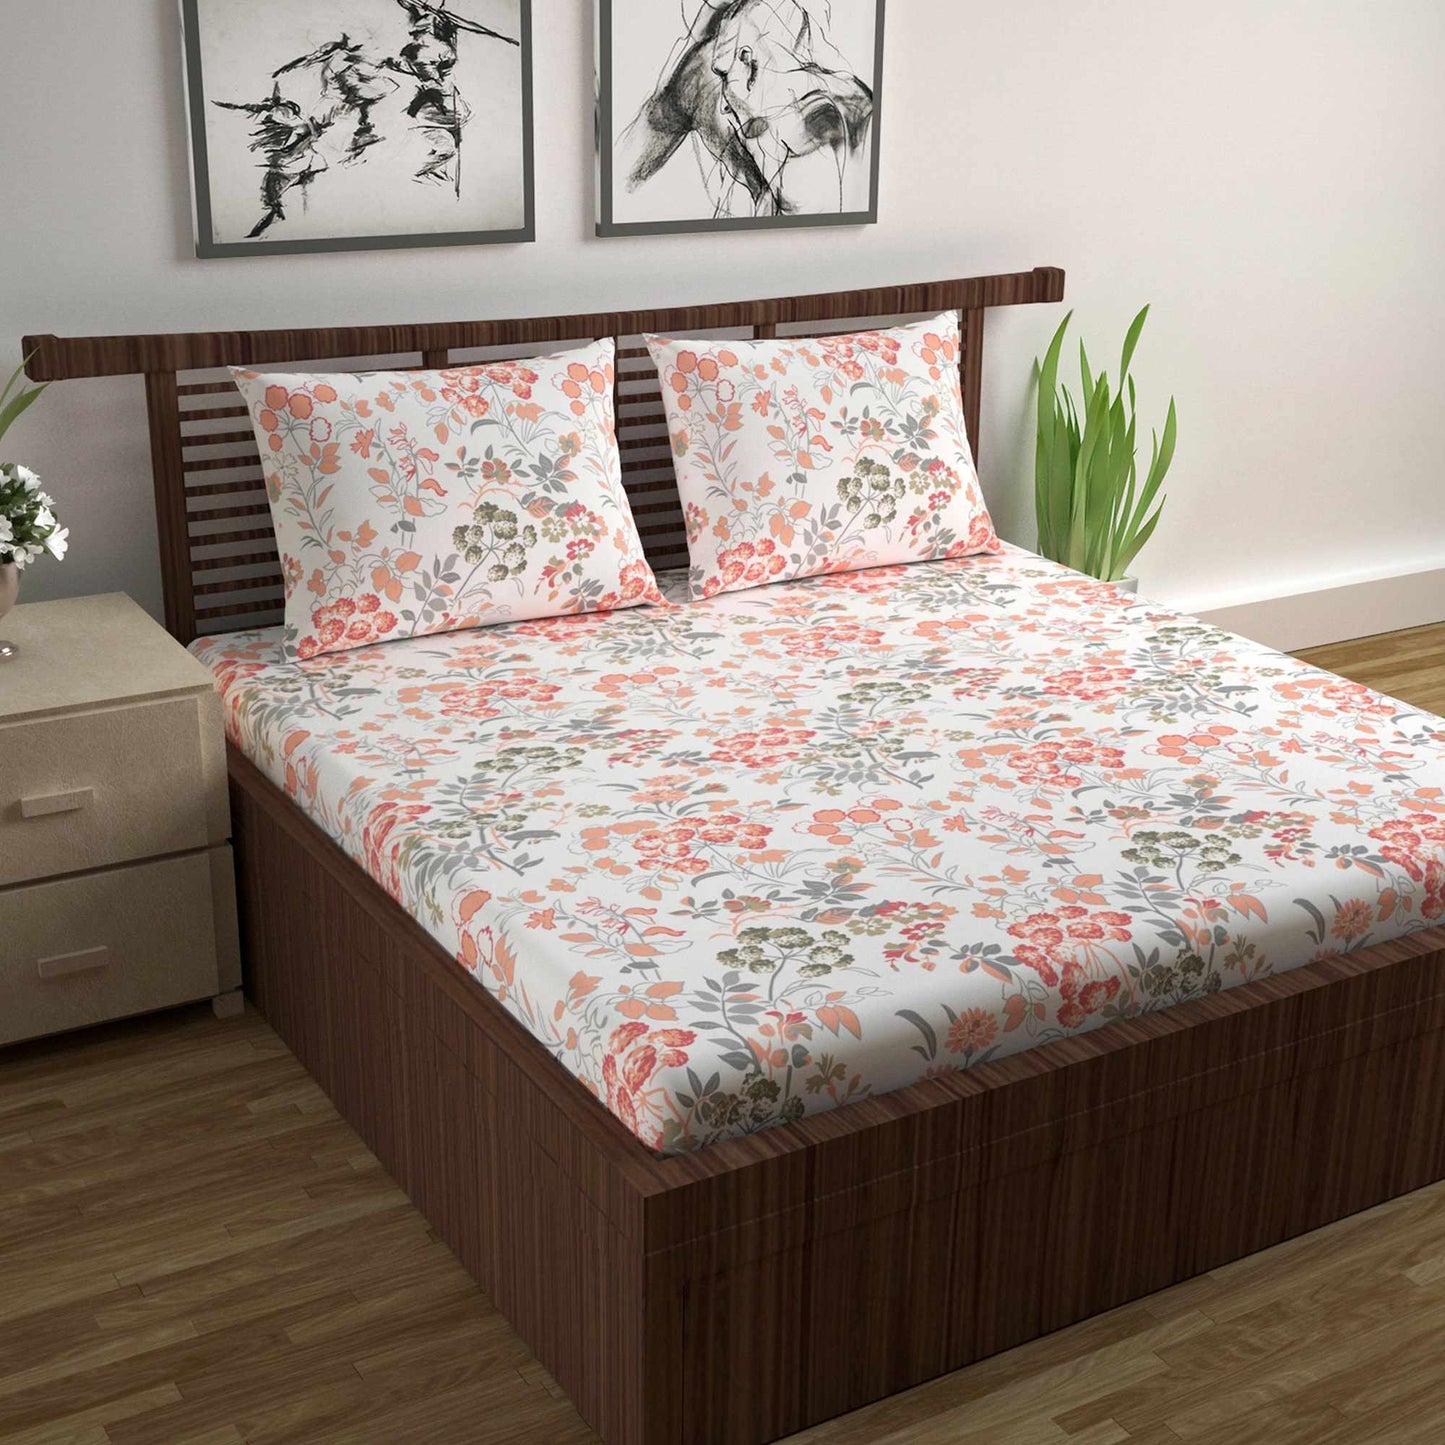 Vintage Floral 100% Cotton Bedsheet for Double Bed- Peach